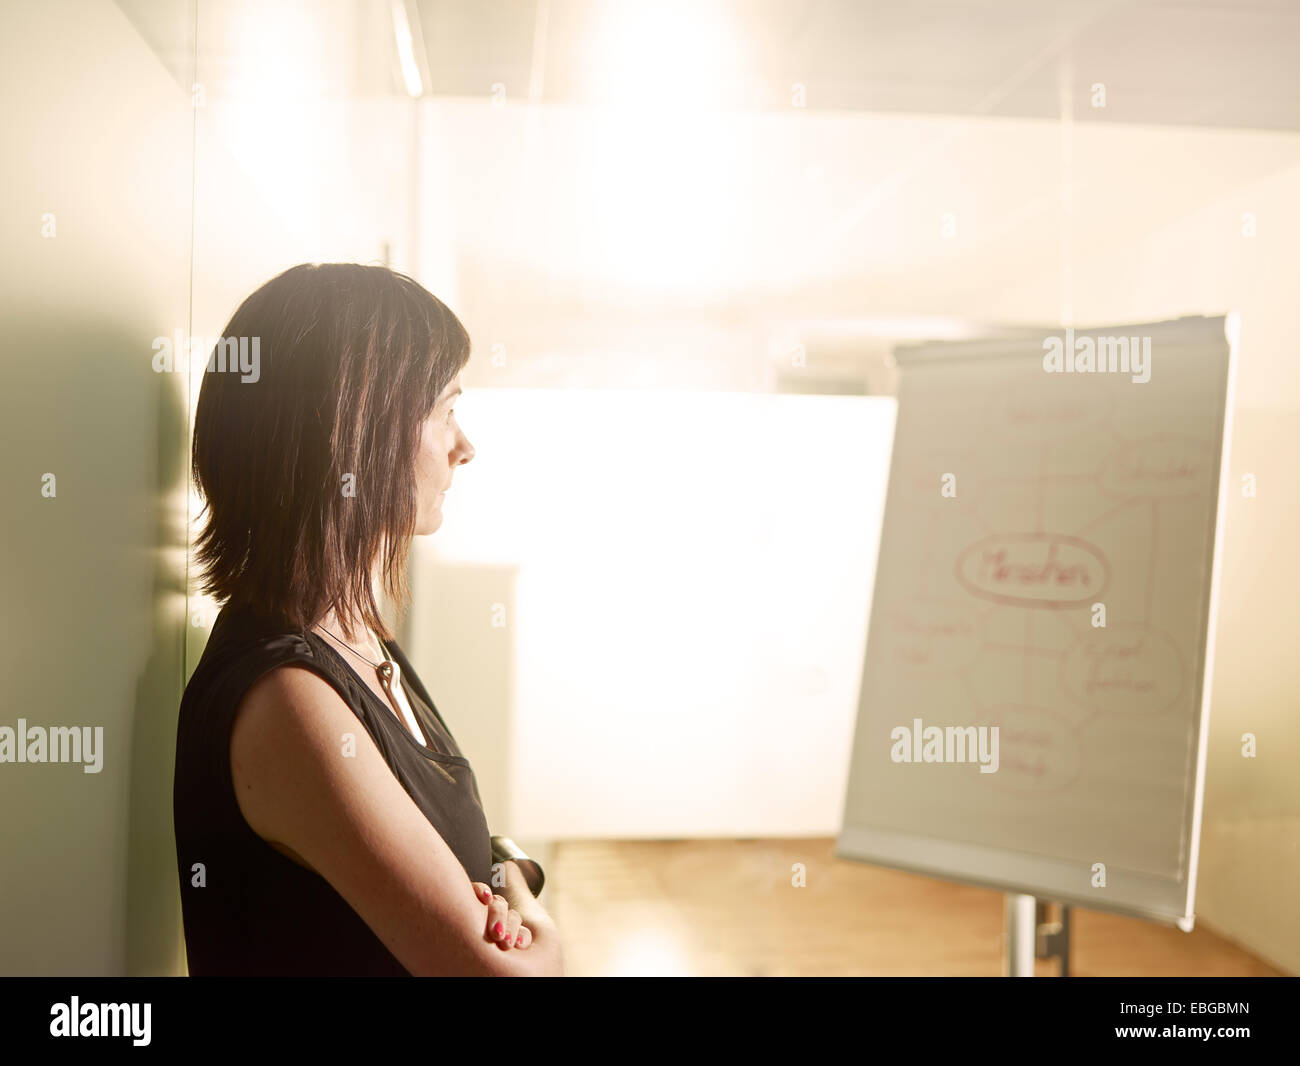 Woman standing with her arms crossed in an office, looking at a flip chart, Innsbruck, Tyrol, Austria Stock Photo